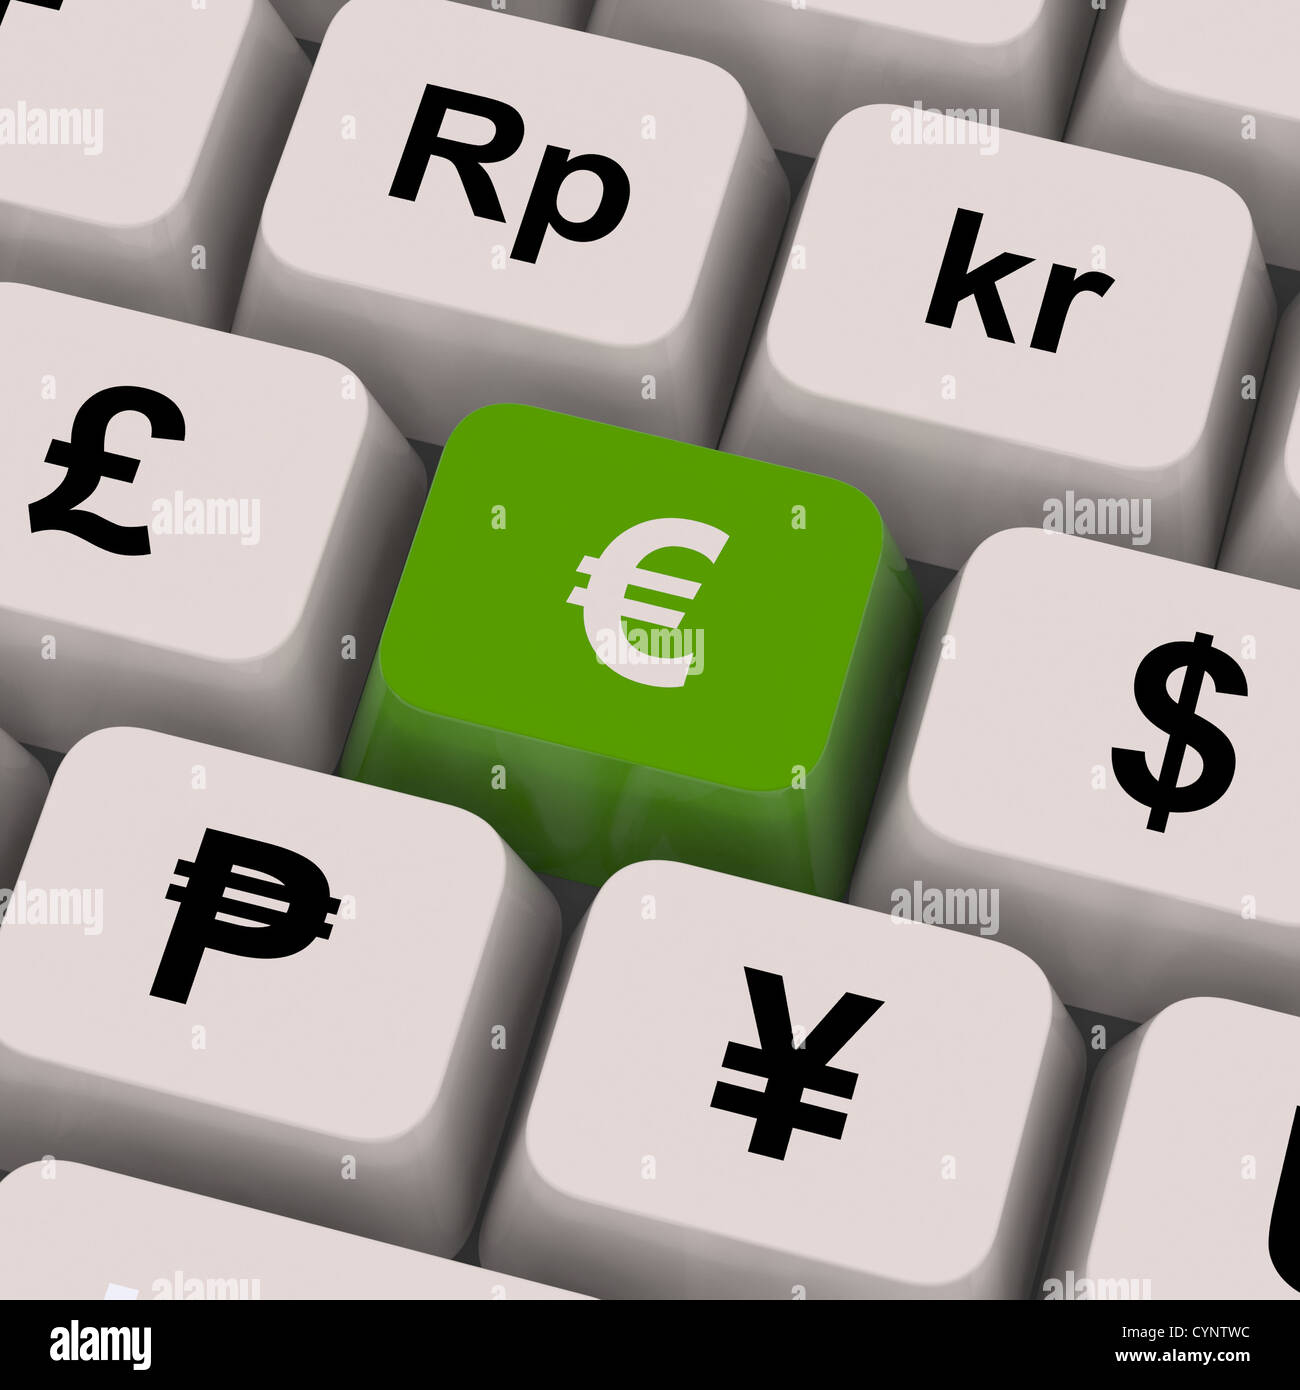 Euro And Currencies Keys Showing Money Exchange Or Forex Stock Photo - Alamy